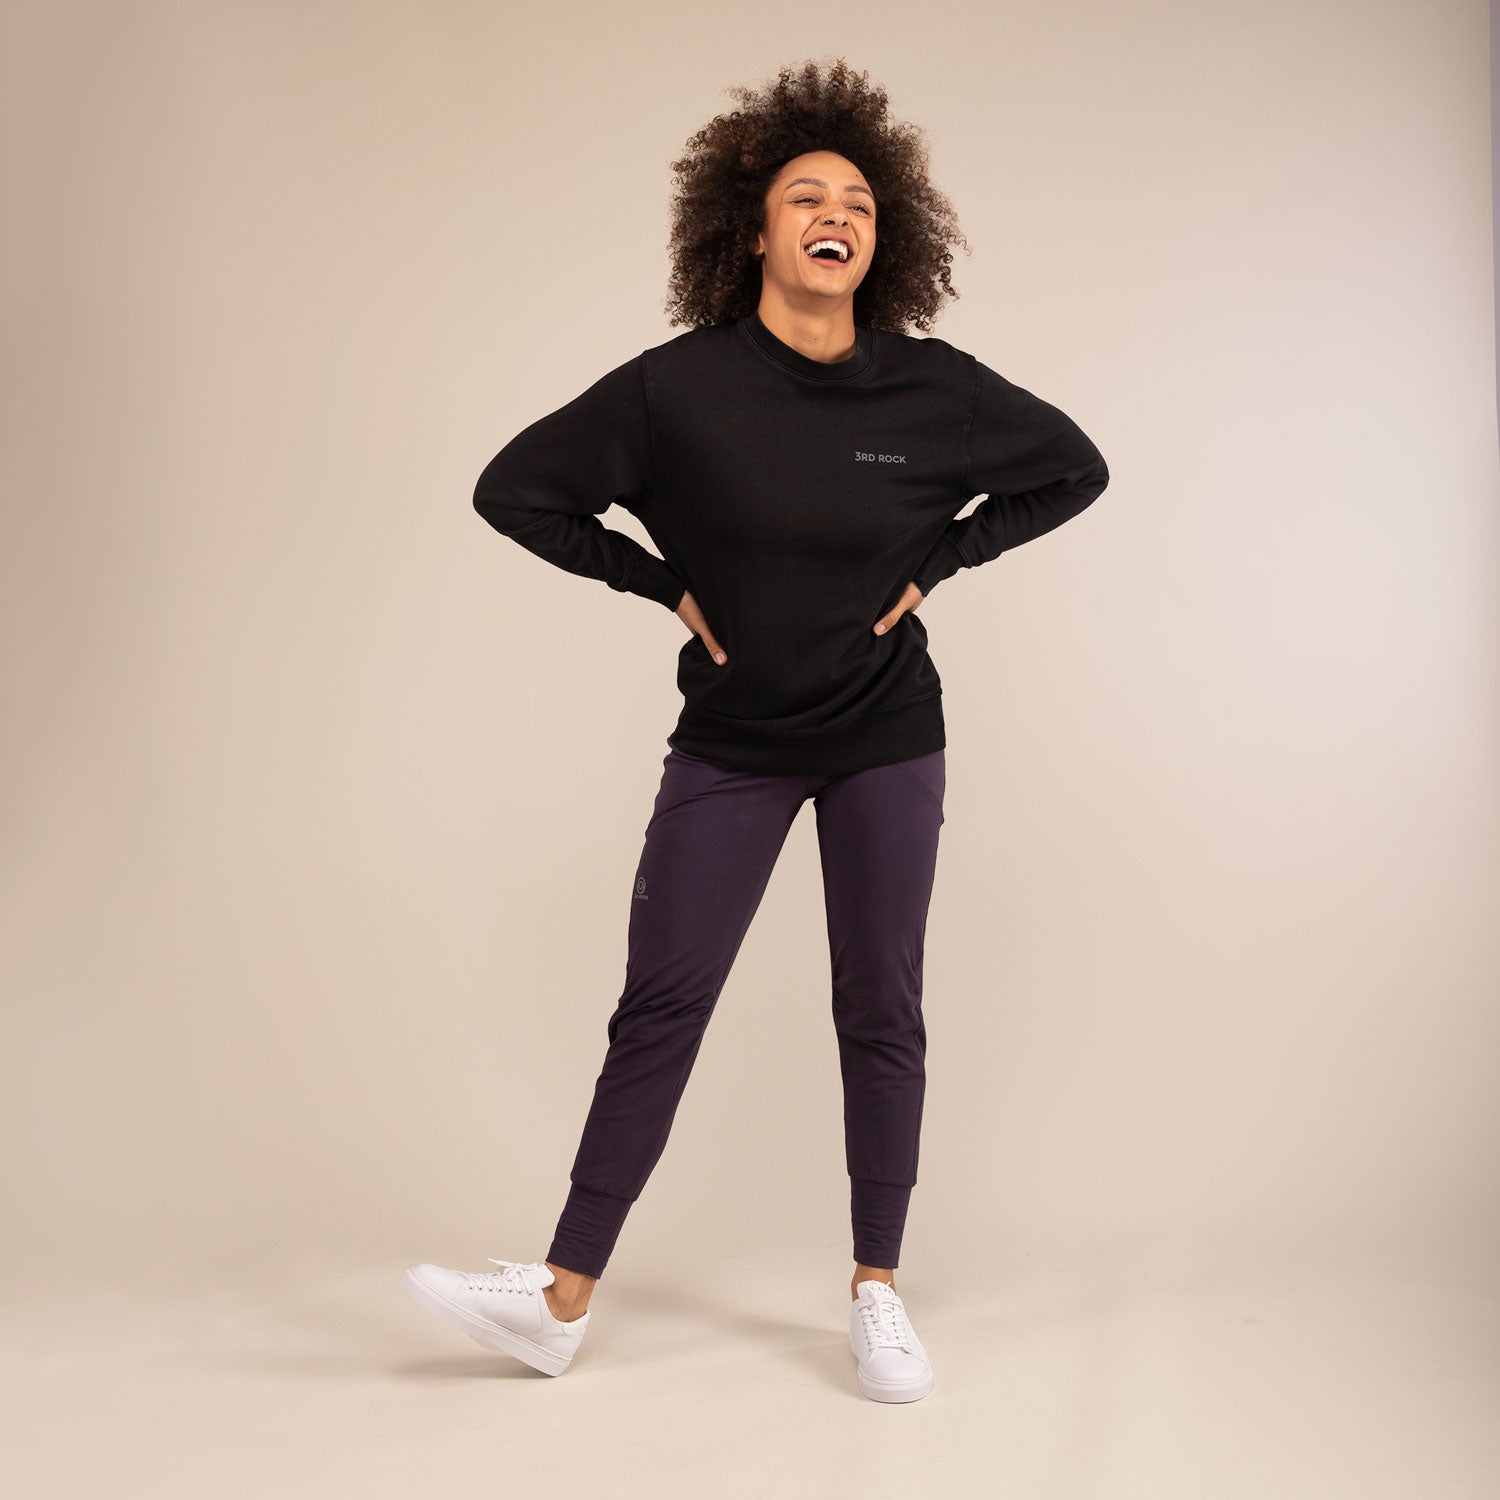 BELLAMY SWEATSHIRT |  Organic Cotton Sweatshirt | 3RD ROCK Clothing -  Kendal is 5ft 8 with a 36" bust and wears a size M F